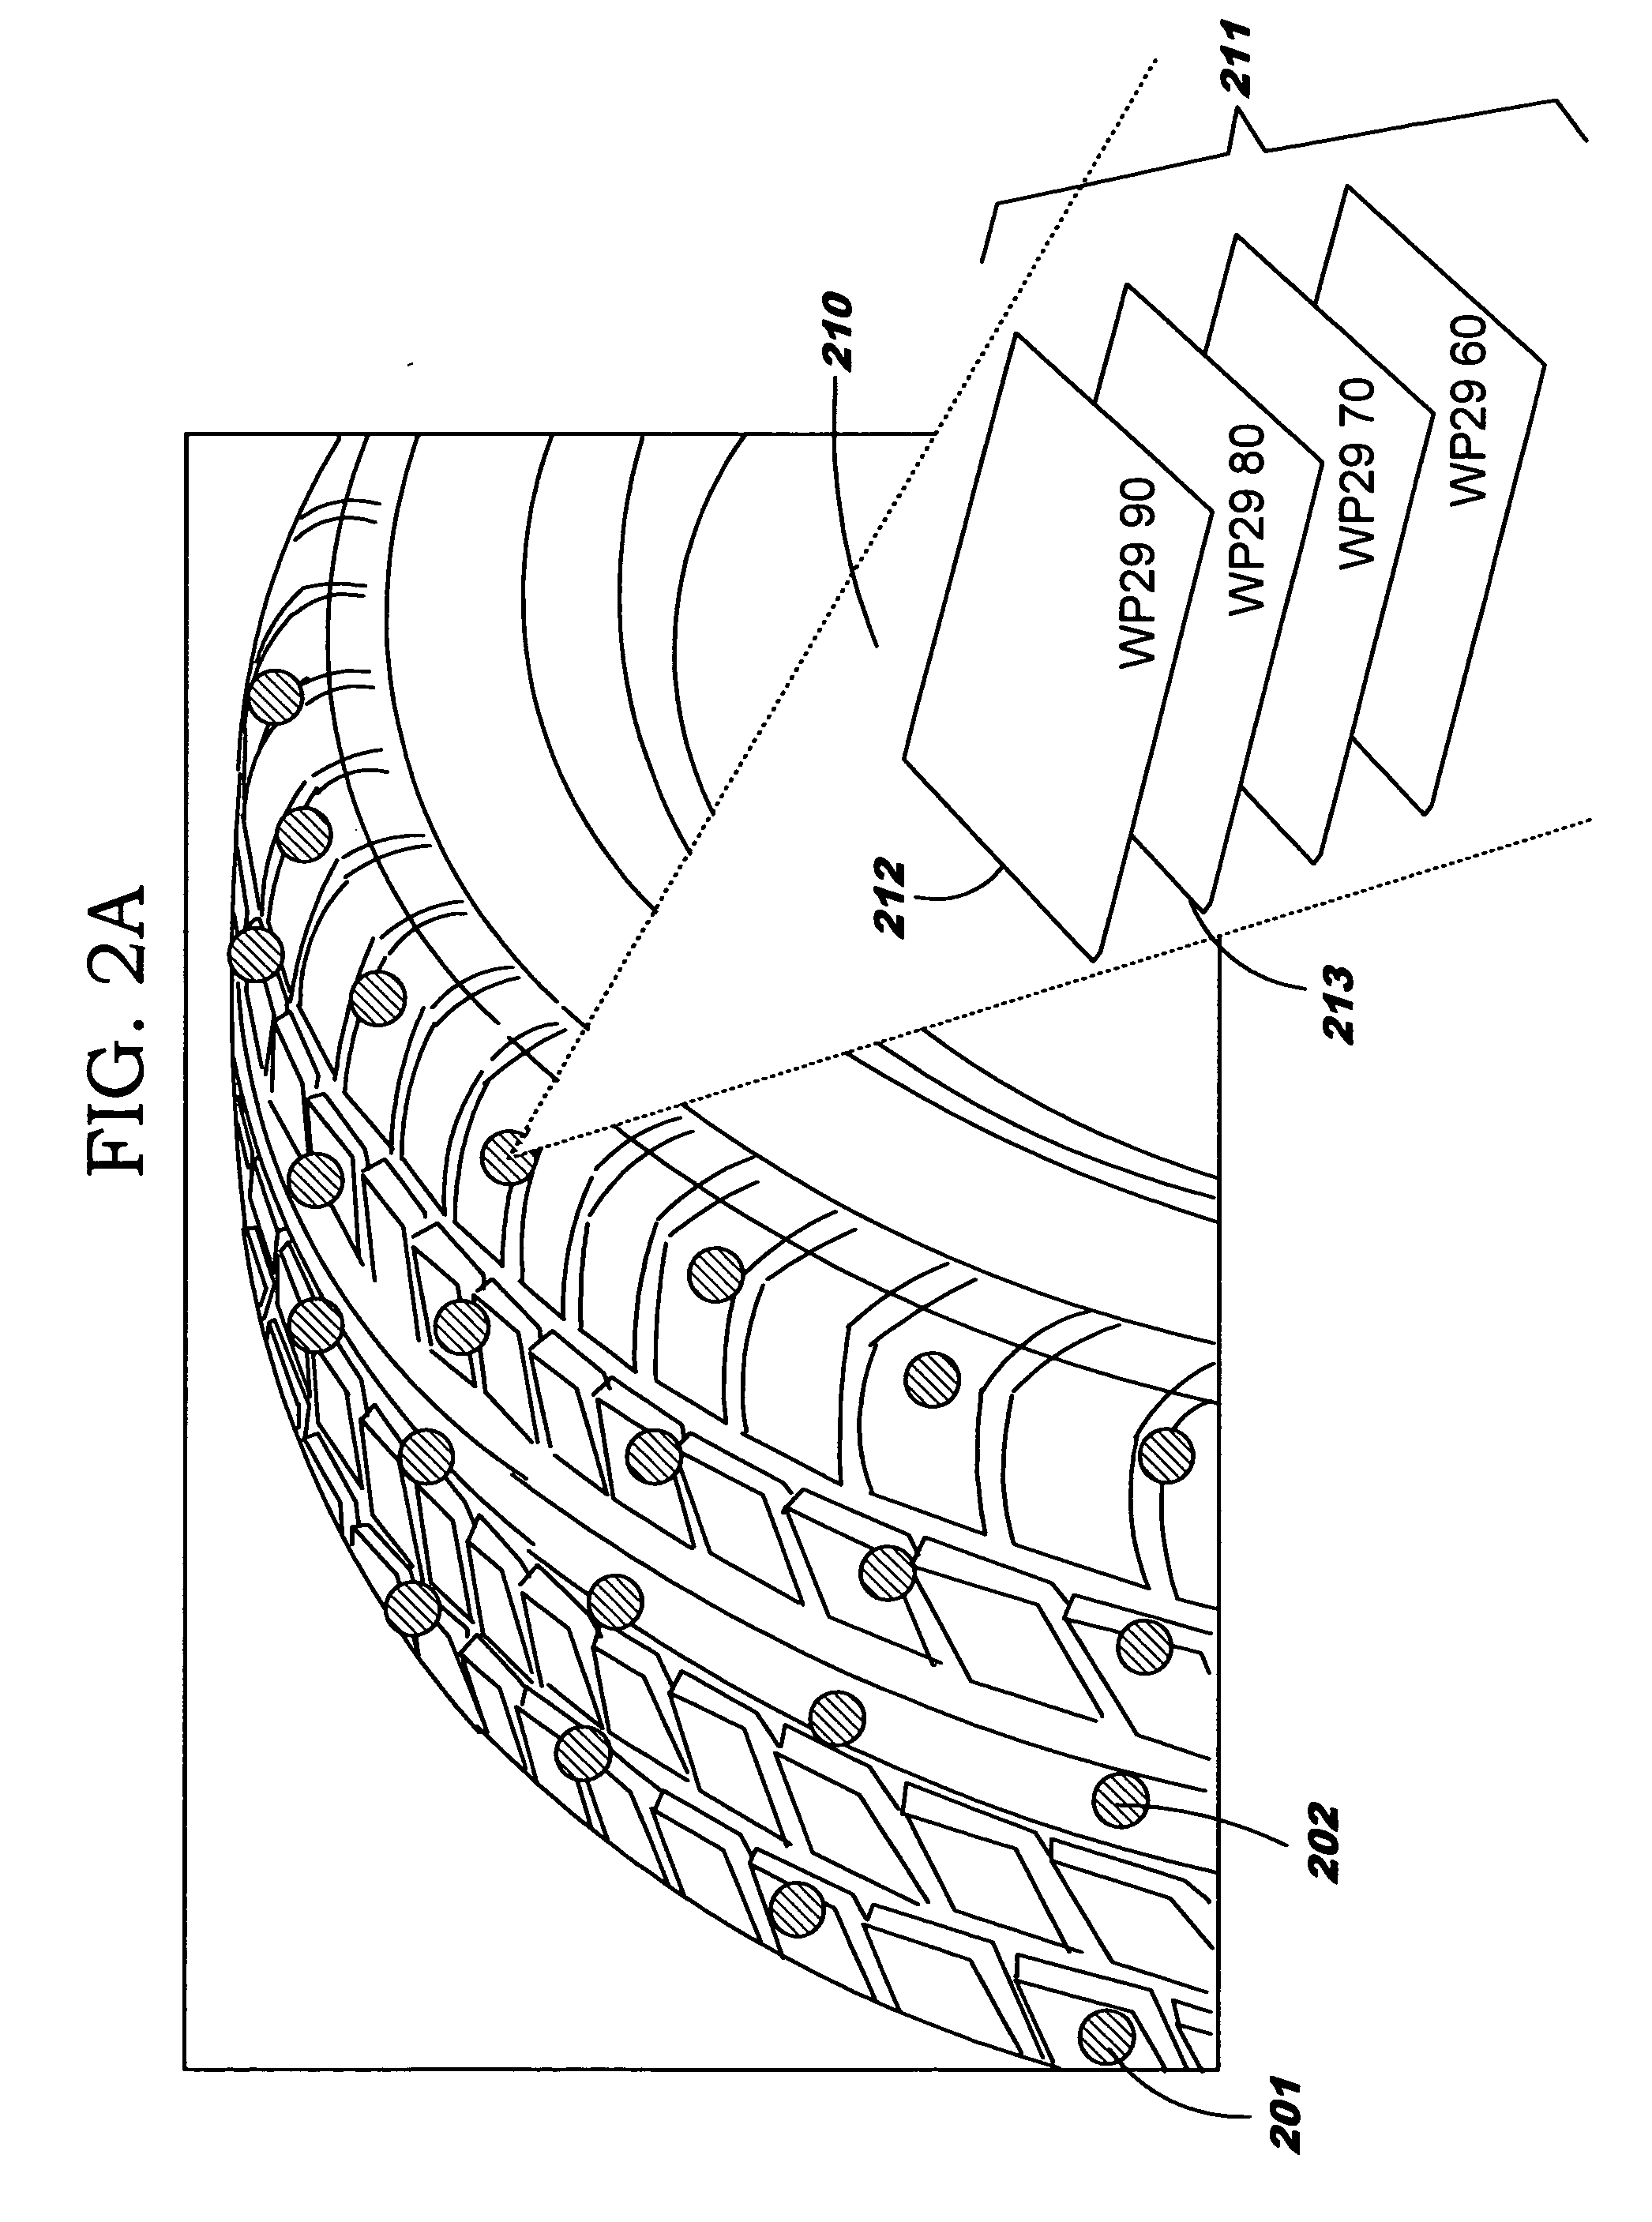 Detecting wear through use of information-transmitting devices